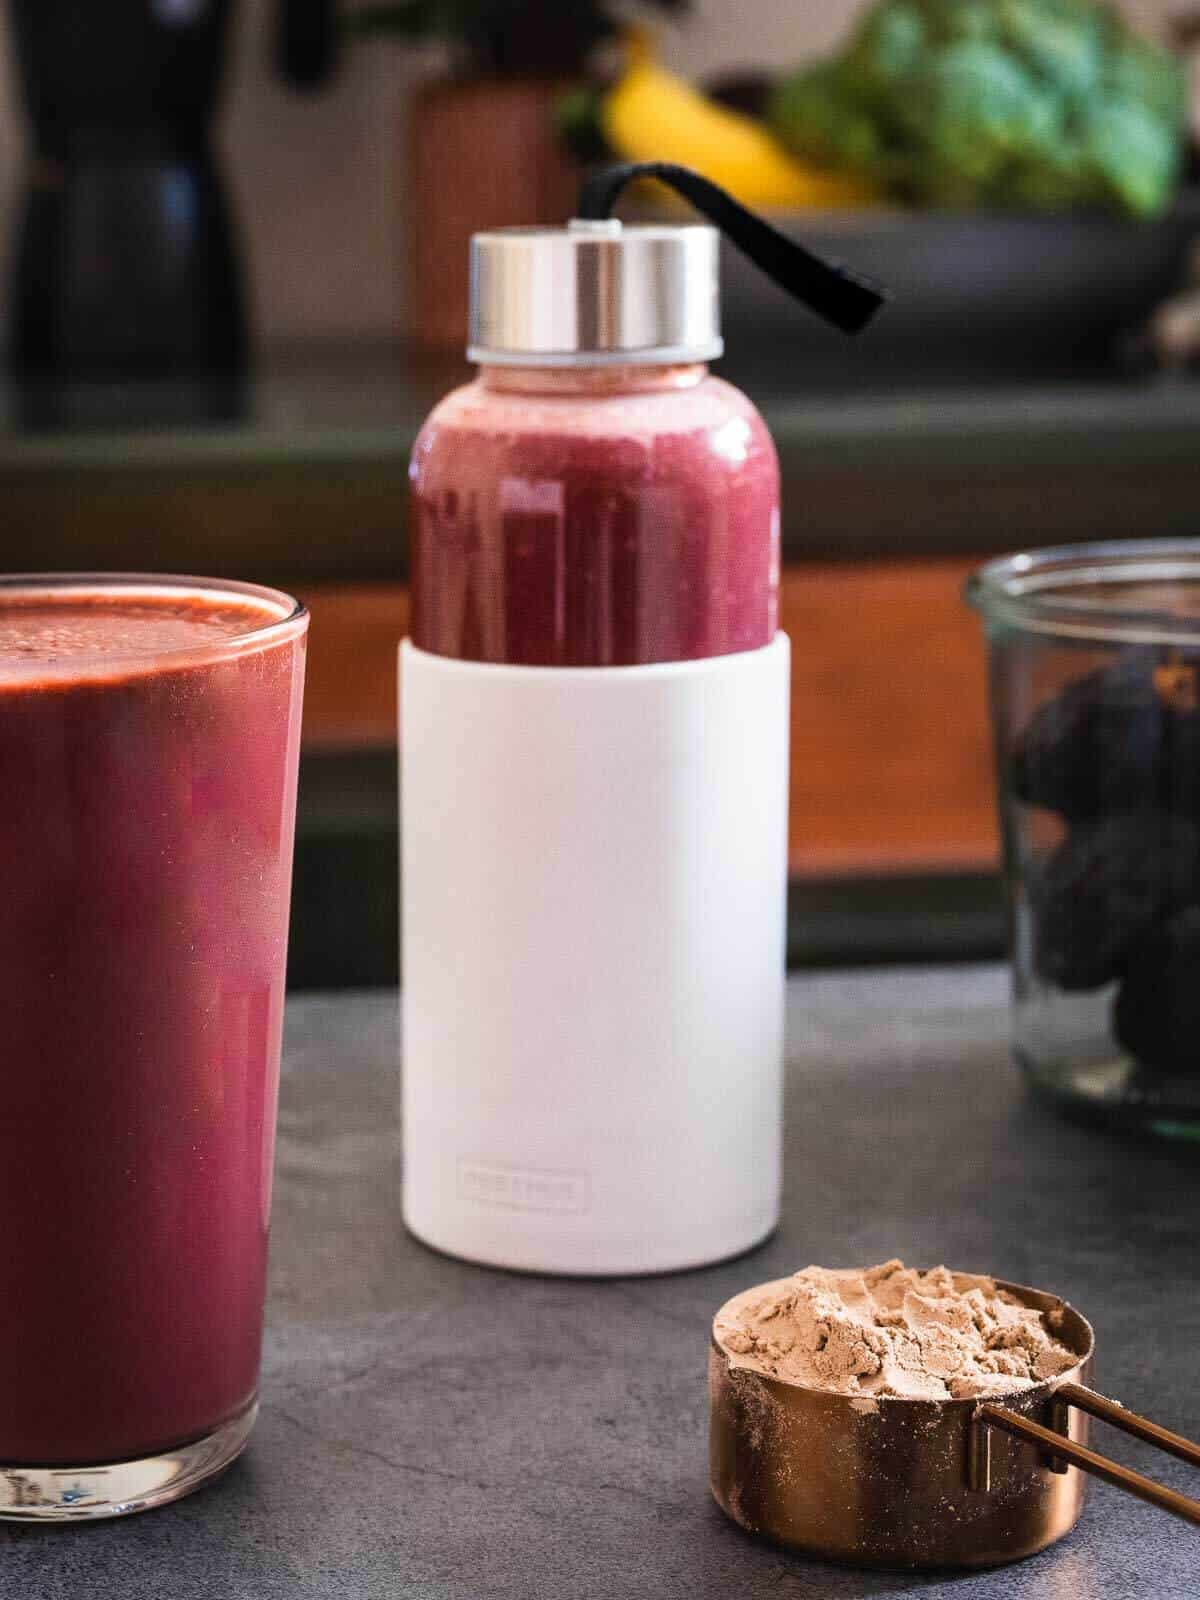 Store the smoothie in a BPA-free container.